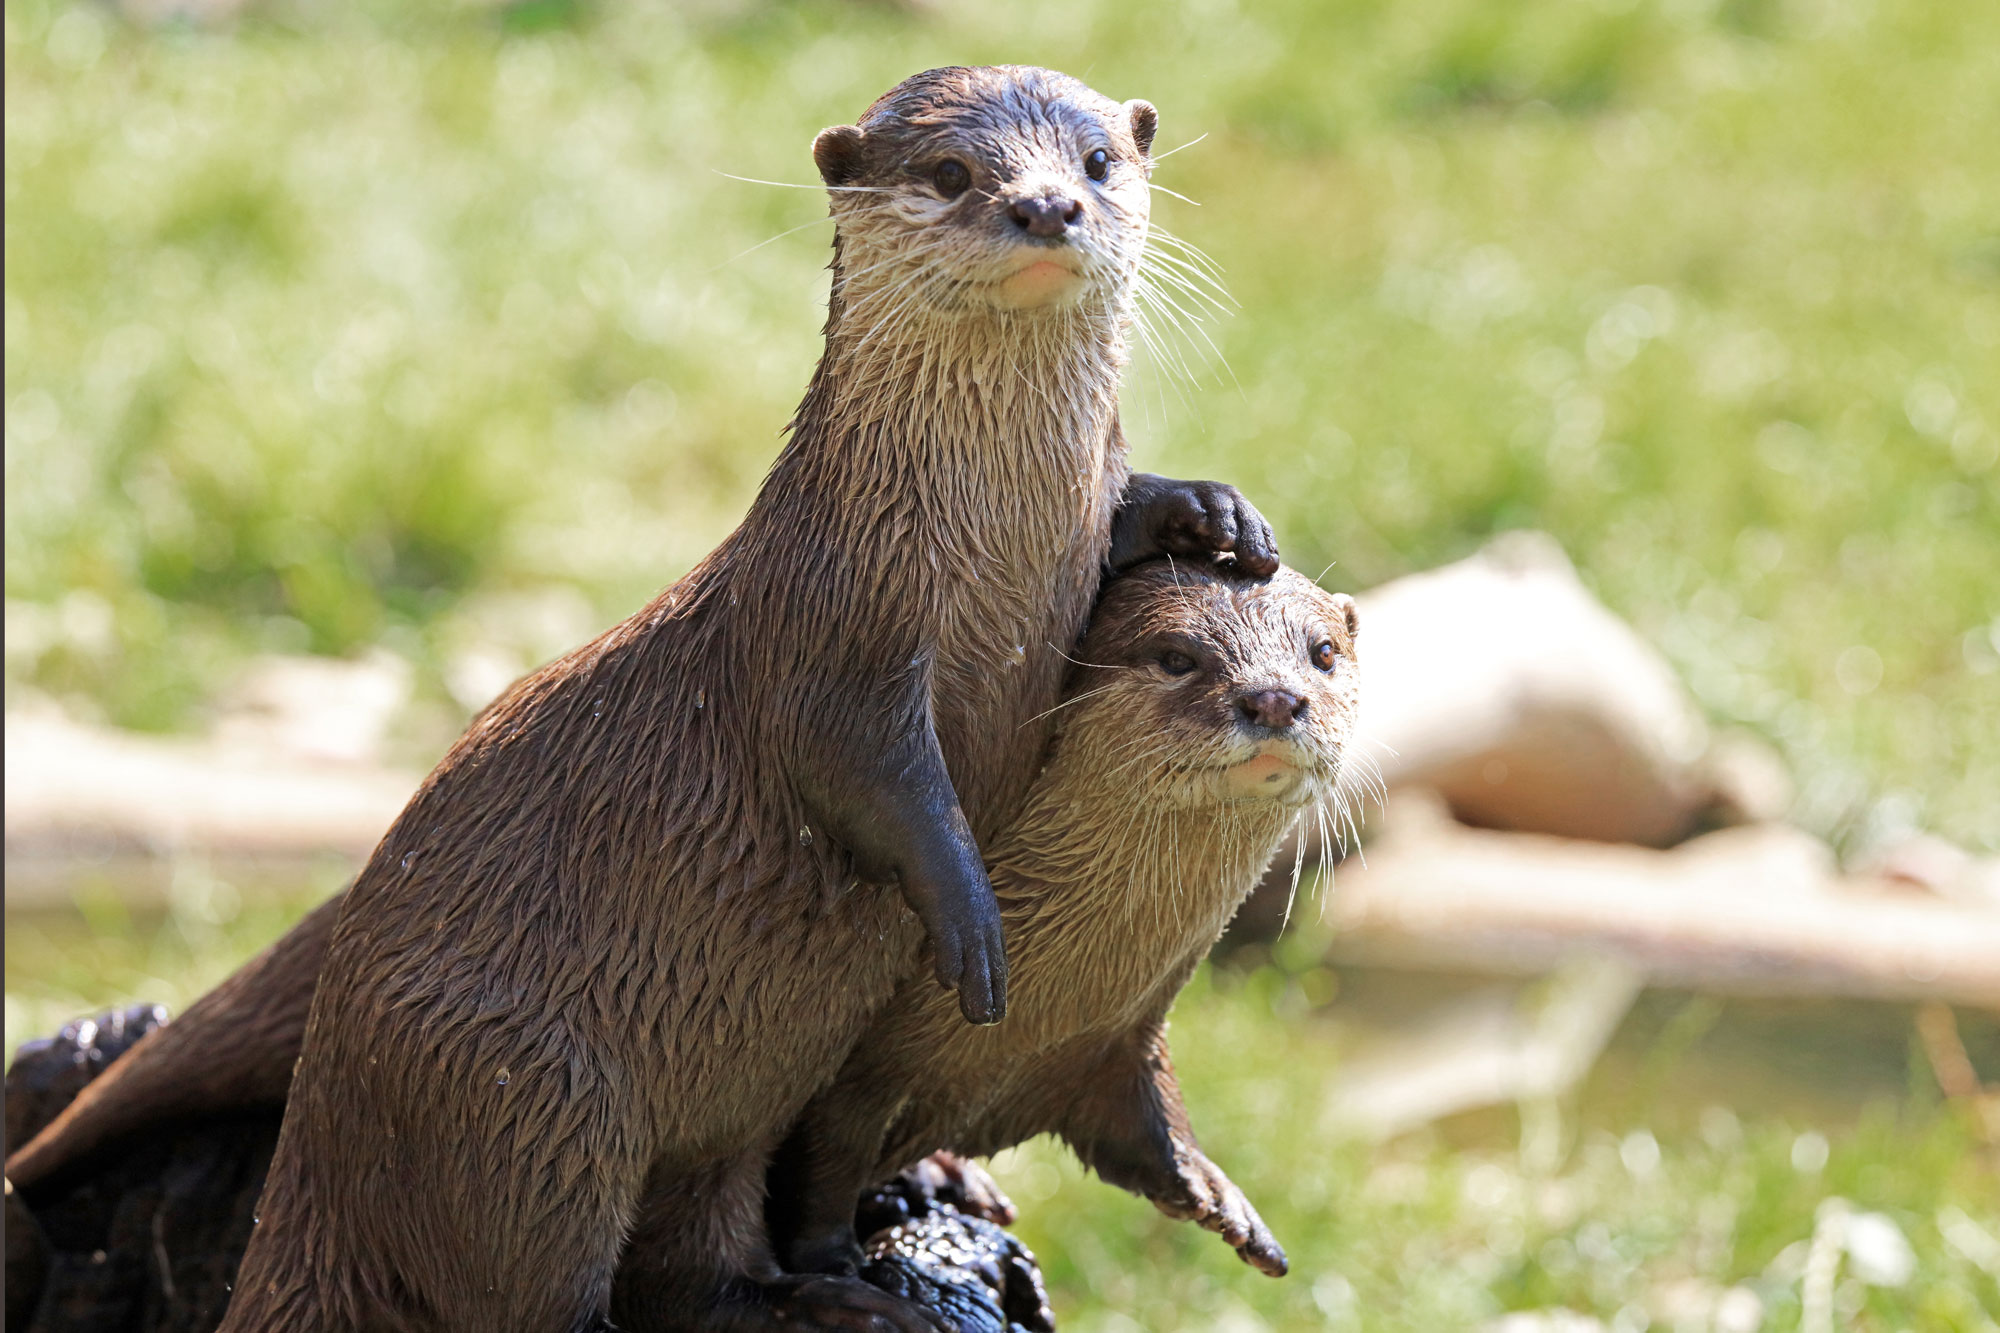 Two river otters on the ground